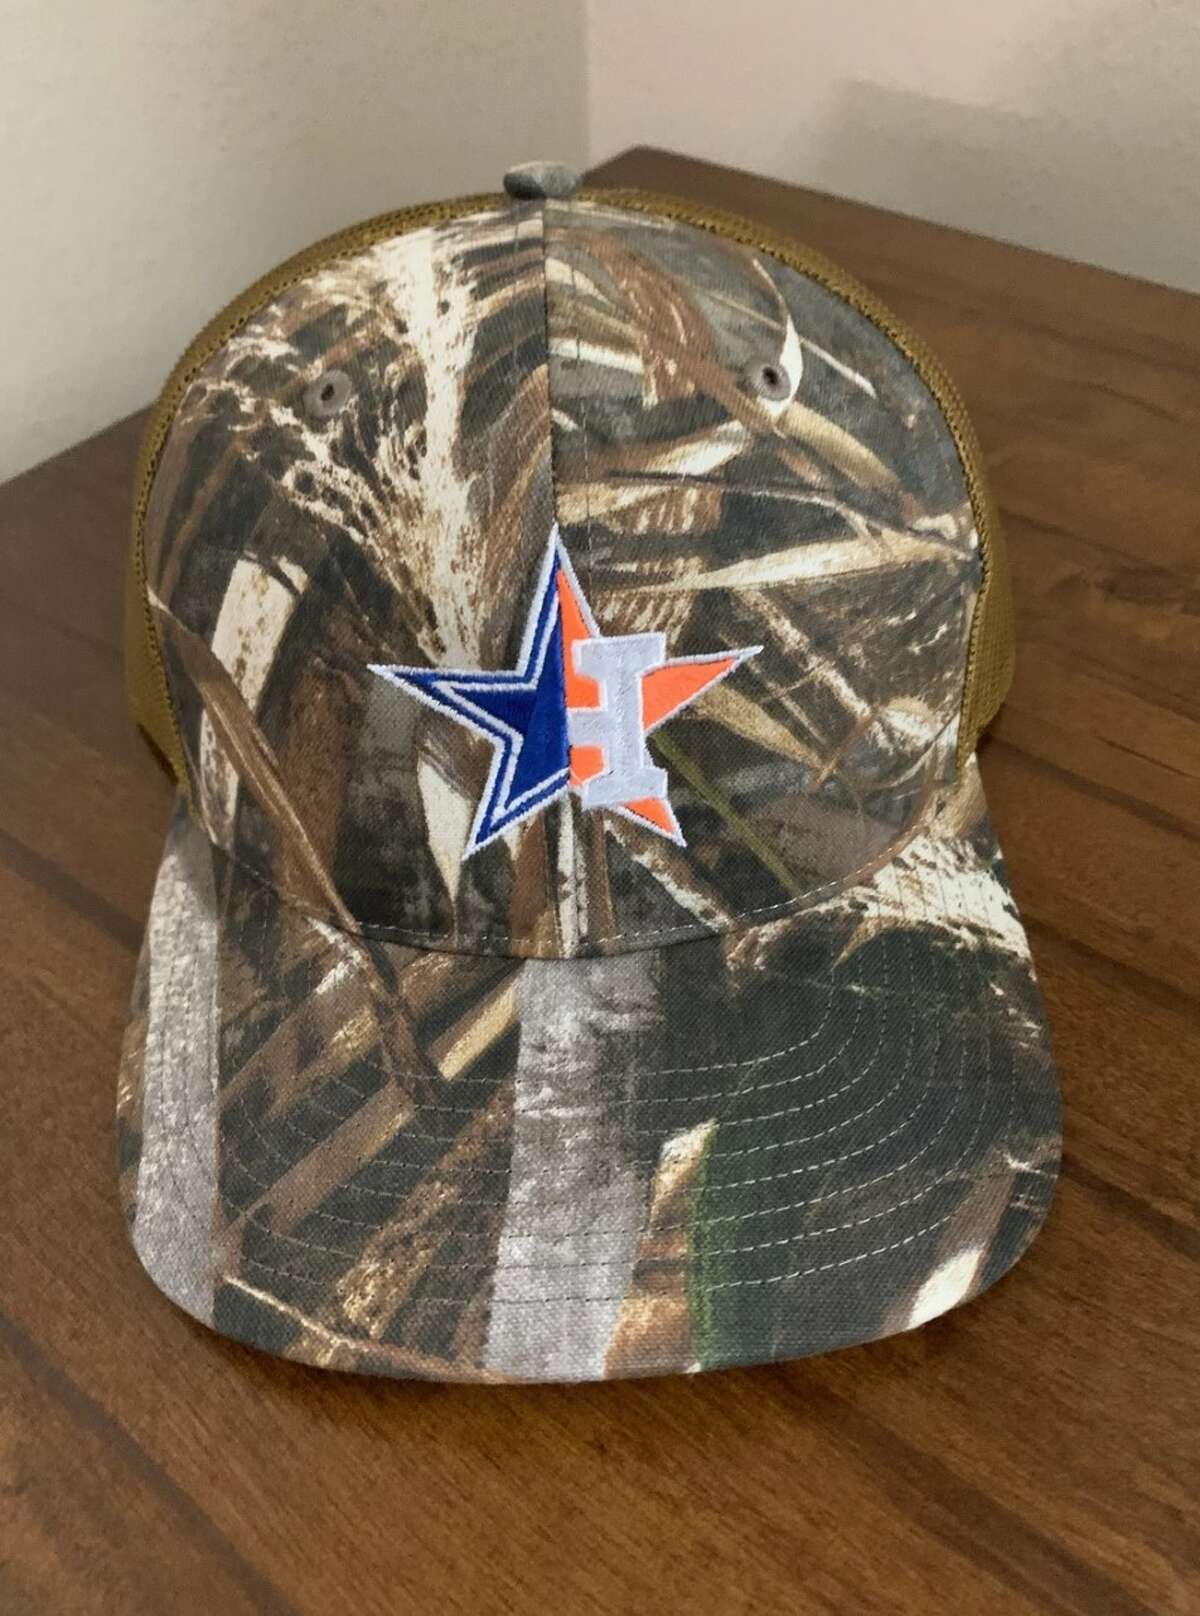 Baytown Hat Co. rolled out a design making it possible for fans to represent the Houston Astros and the Dallas Cowboys at the same time.